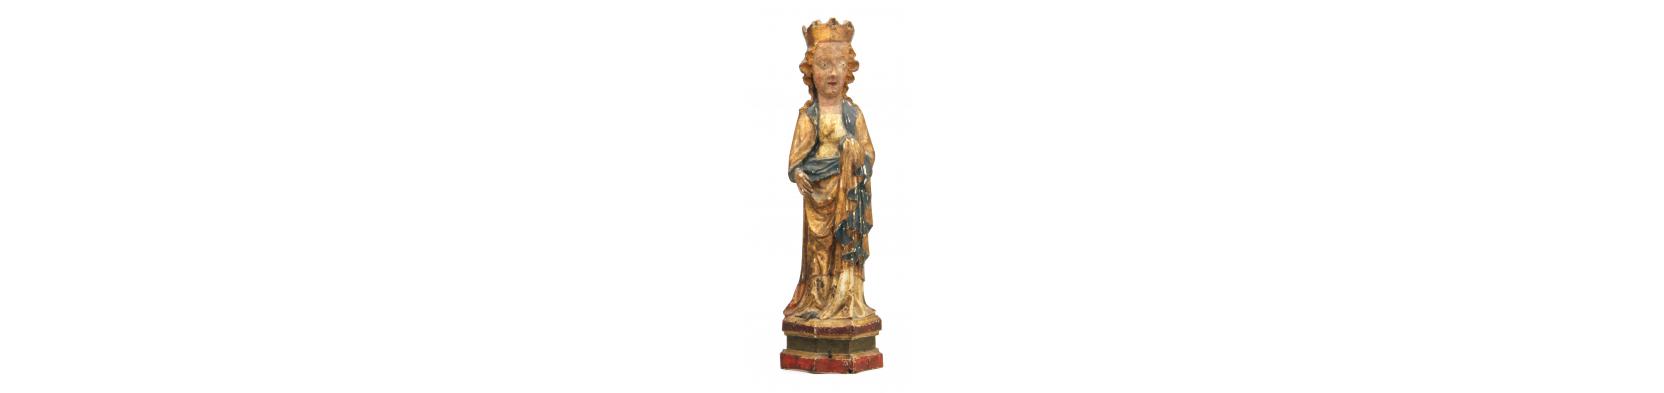 carved-wooden-mary-santos